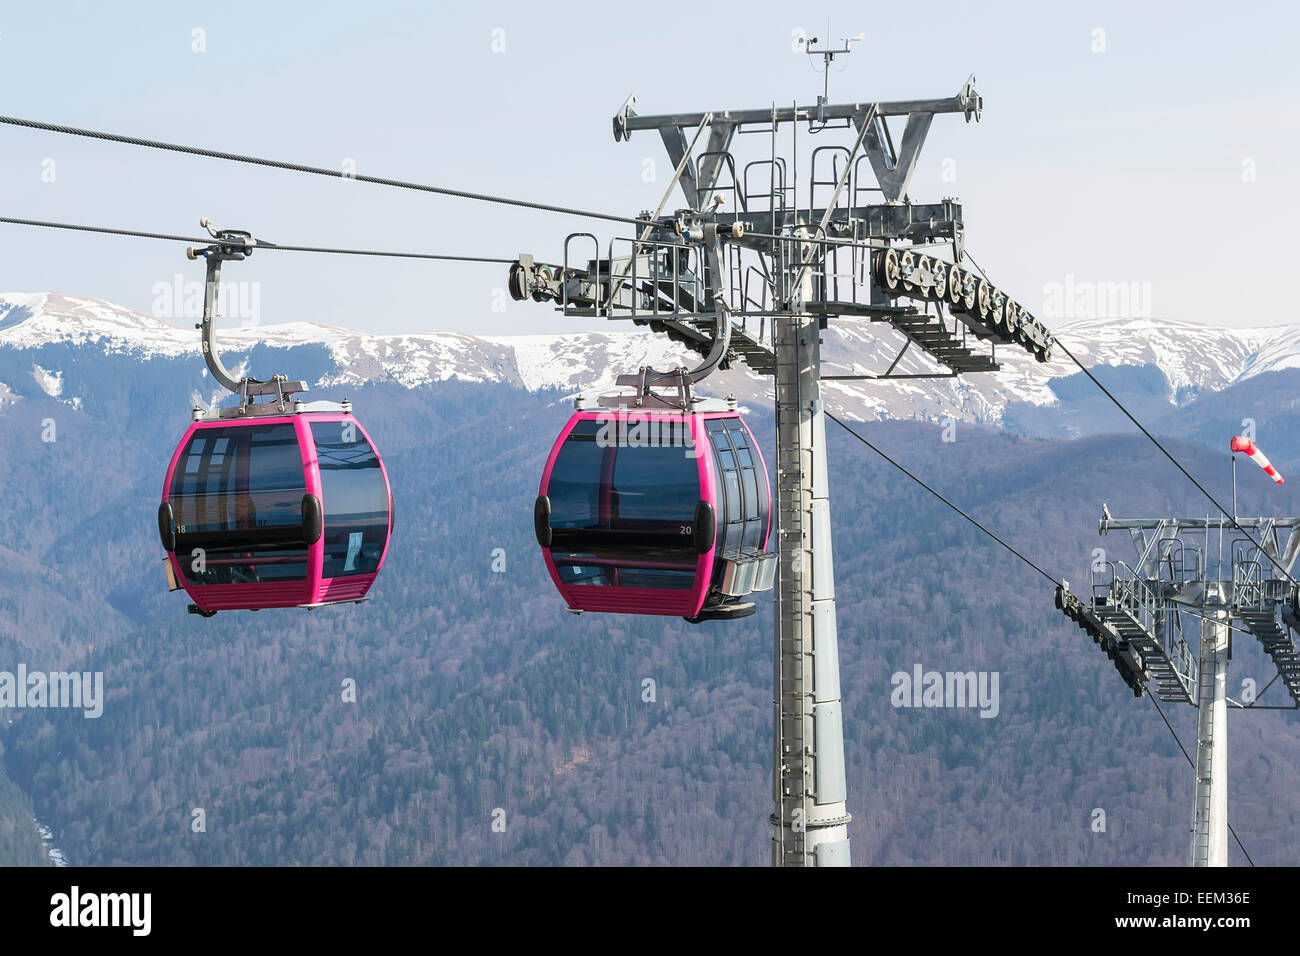 Transportation system of two cable cars at altitude in the mountains Stock Photo